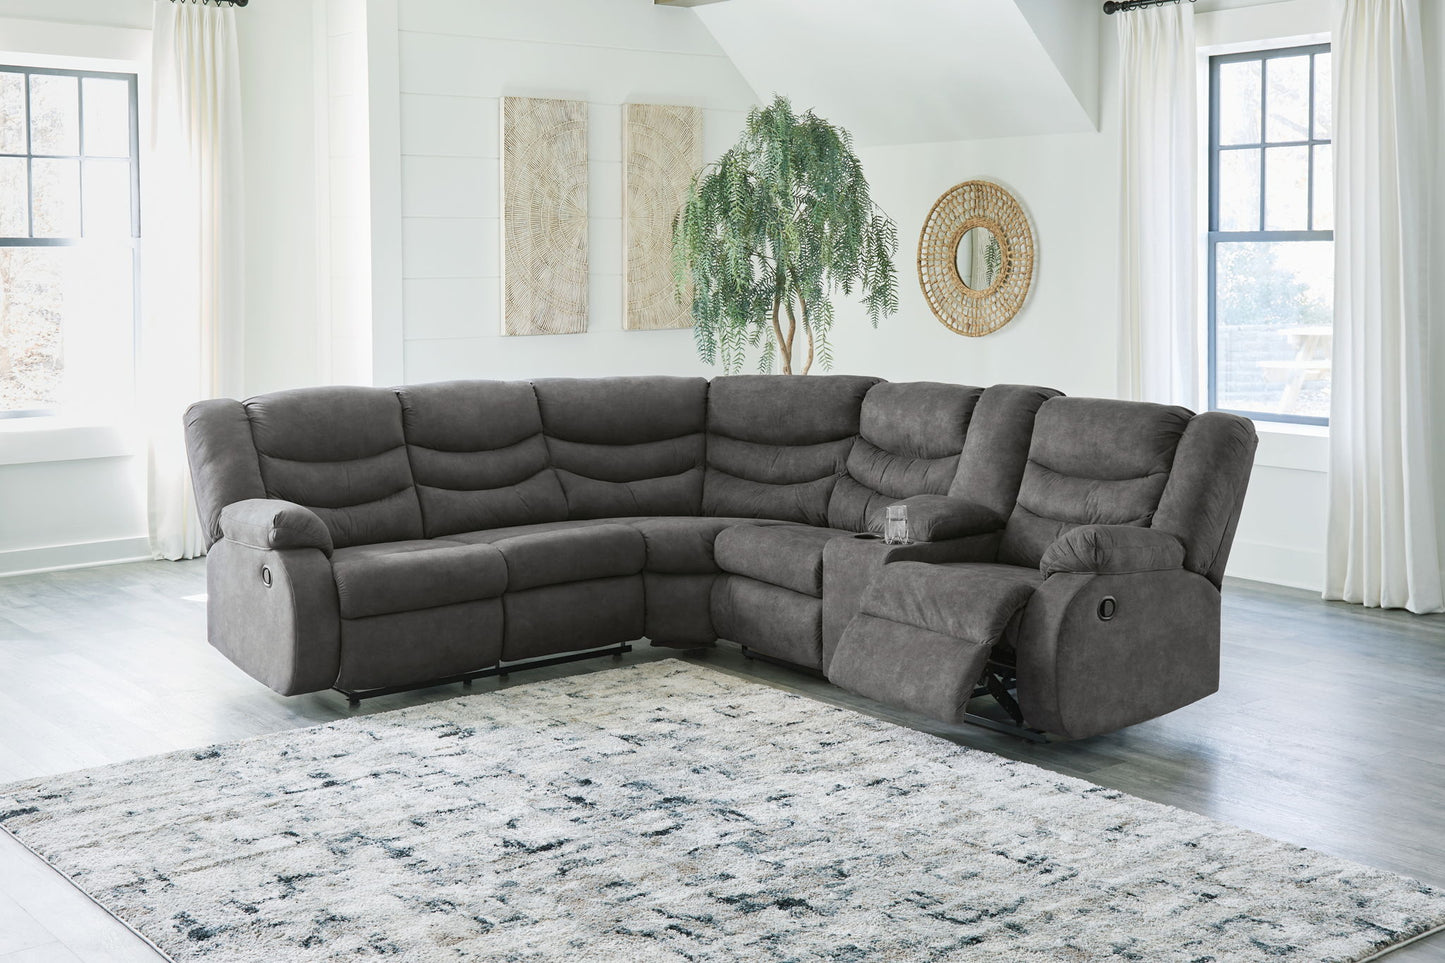 Partymate - Slate - 2-Piece Reclining Sectional With Console